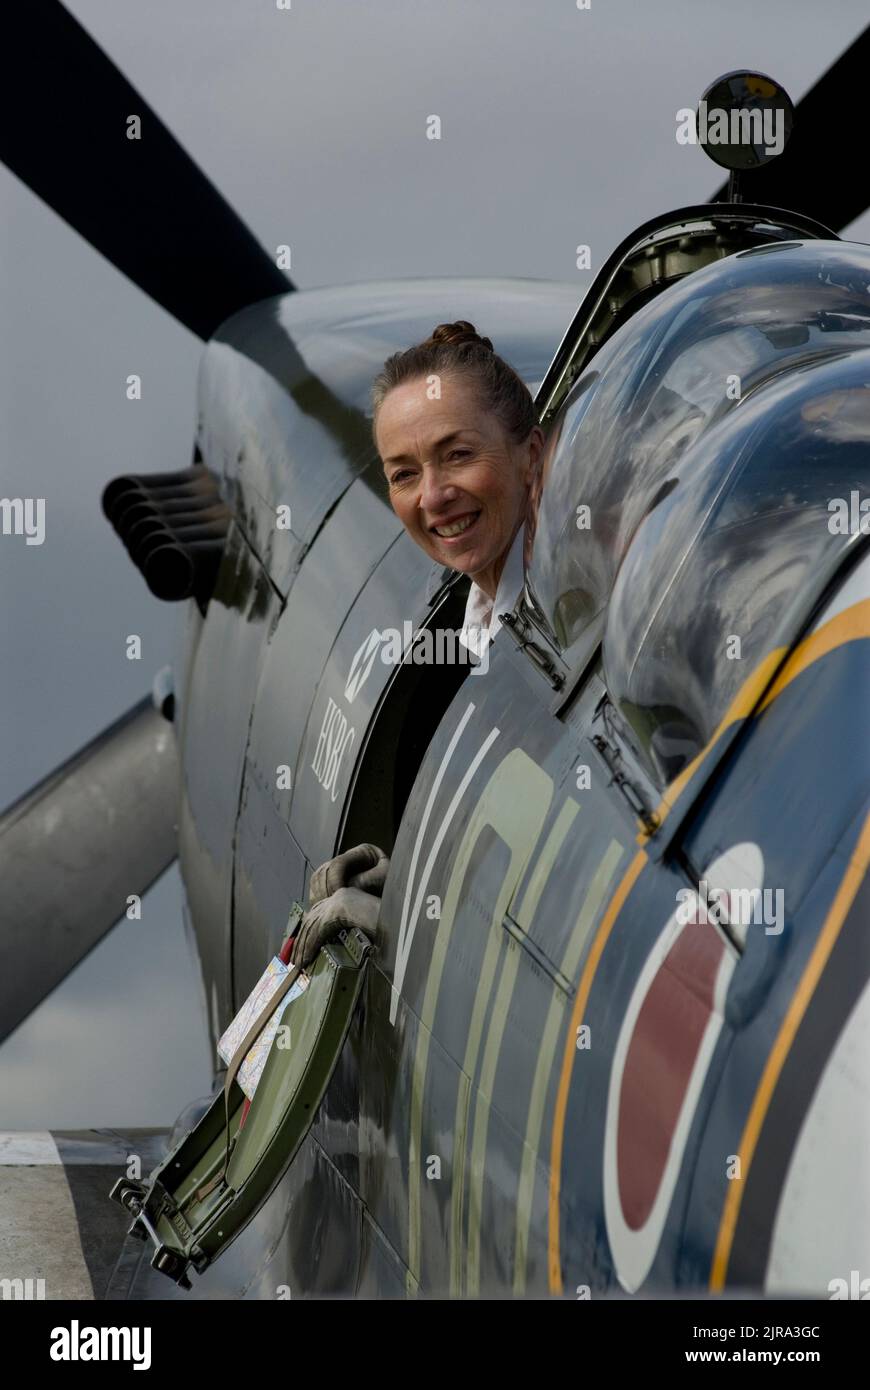 Carolyn Grace, Spitfire Pilot. Carolyn Grace with her Spitfire ML 407 at Duxford Airfield, Cambridgeshire, Britain. Photographed for The Independent on Sunday Review Magazine, August 2008. COPYRIGHT PHOTOGRAPH BY BRIAN HARRIS  © 2008 07808-579804 Stock Photo